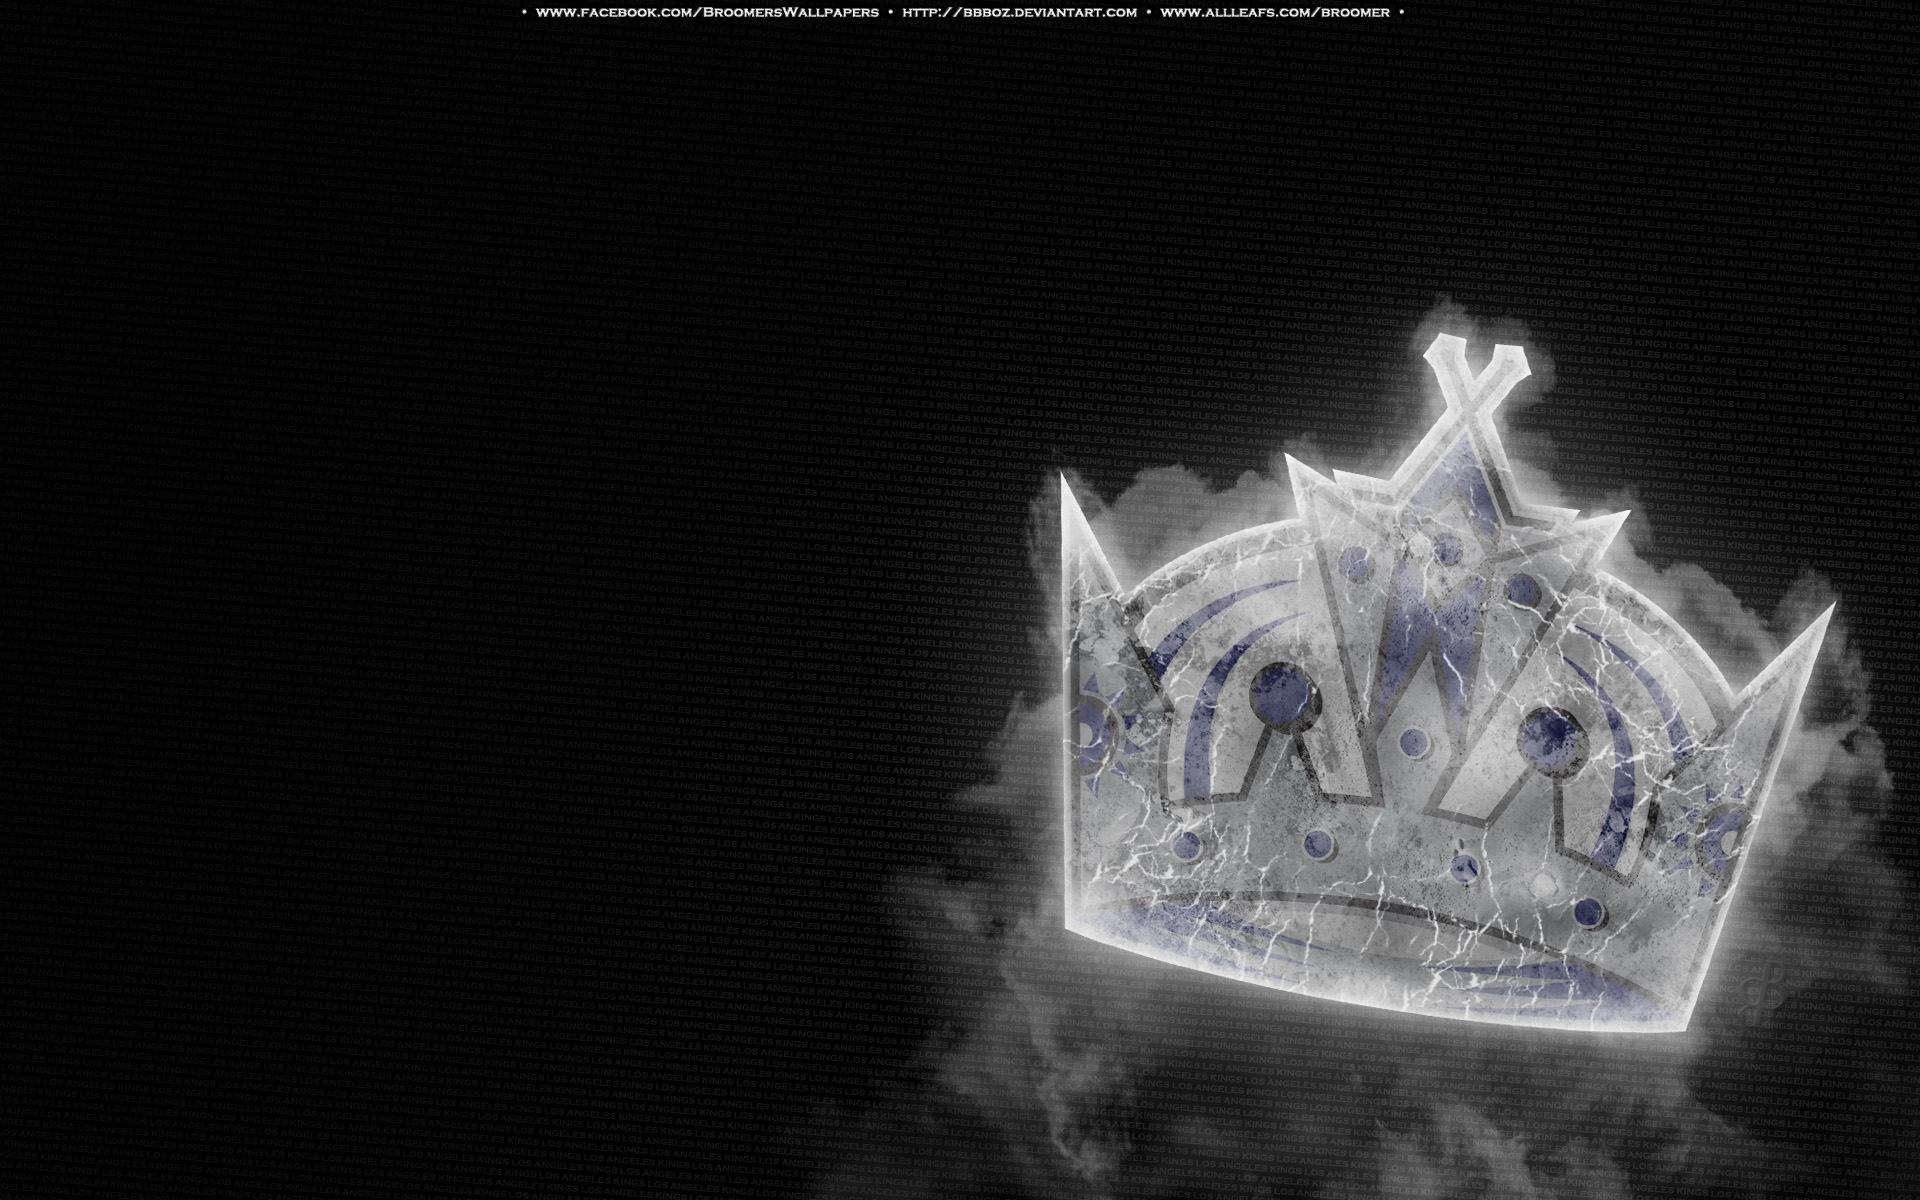 Los Angeles Kings Image Thecelebritypix